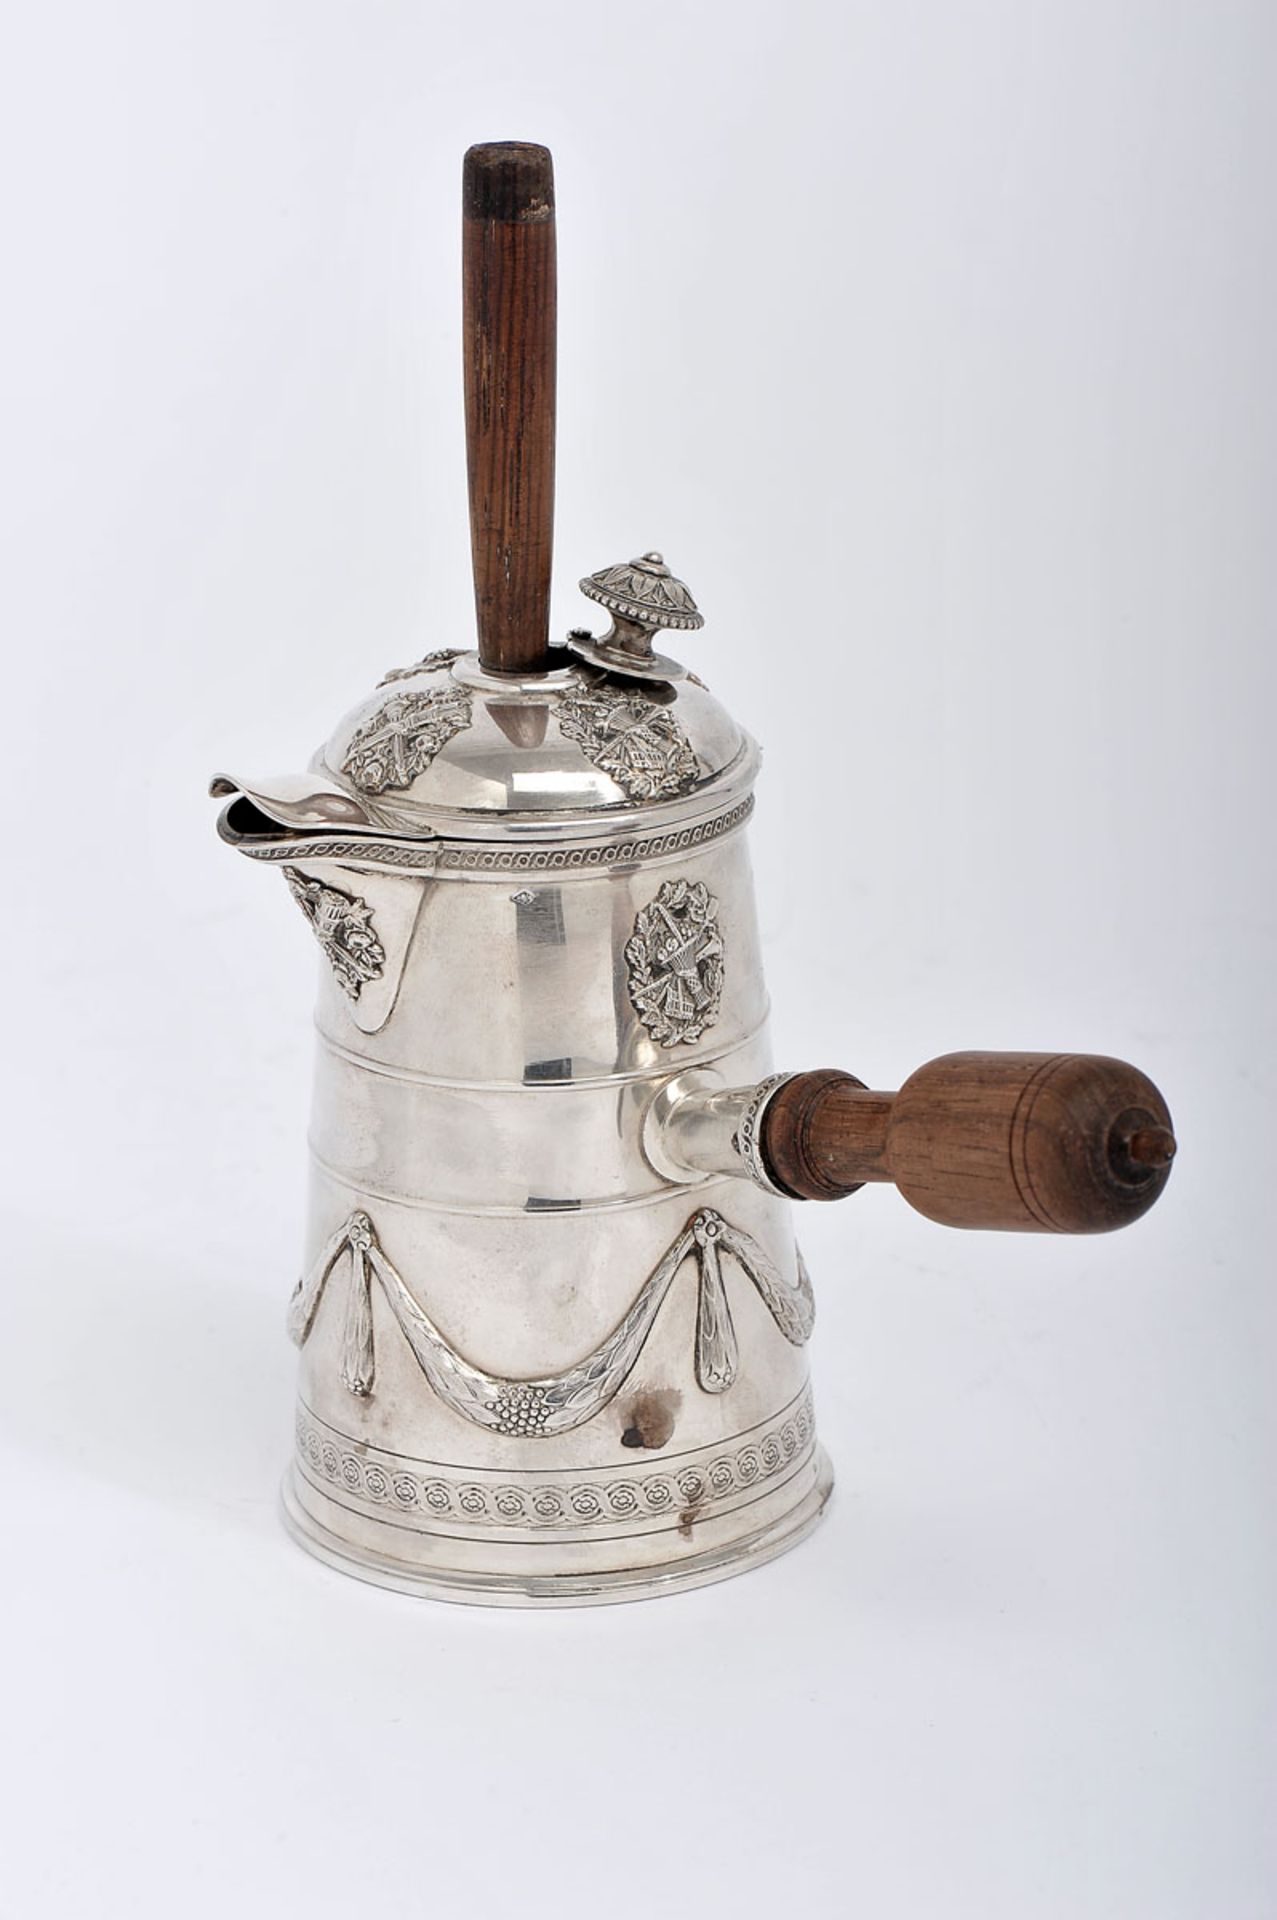 A Chocolate Pot, 950/1000 silver, decoration en relief "Flames, baskets with flowers and